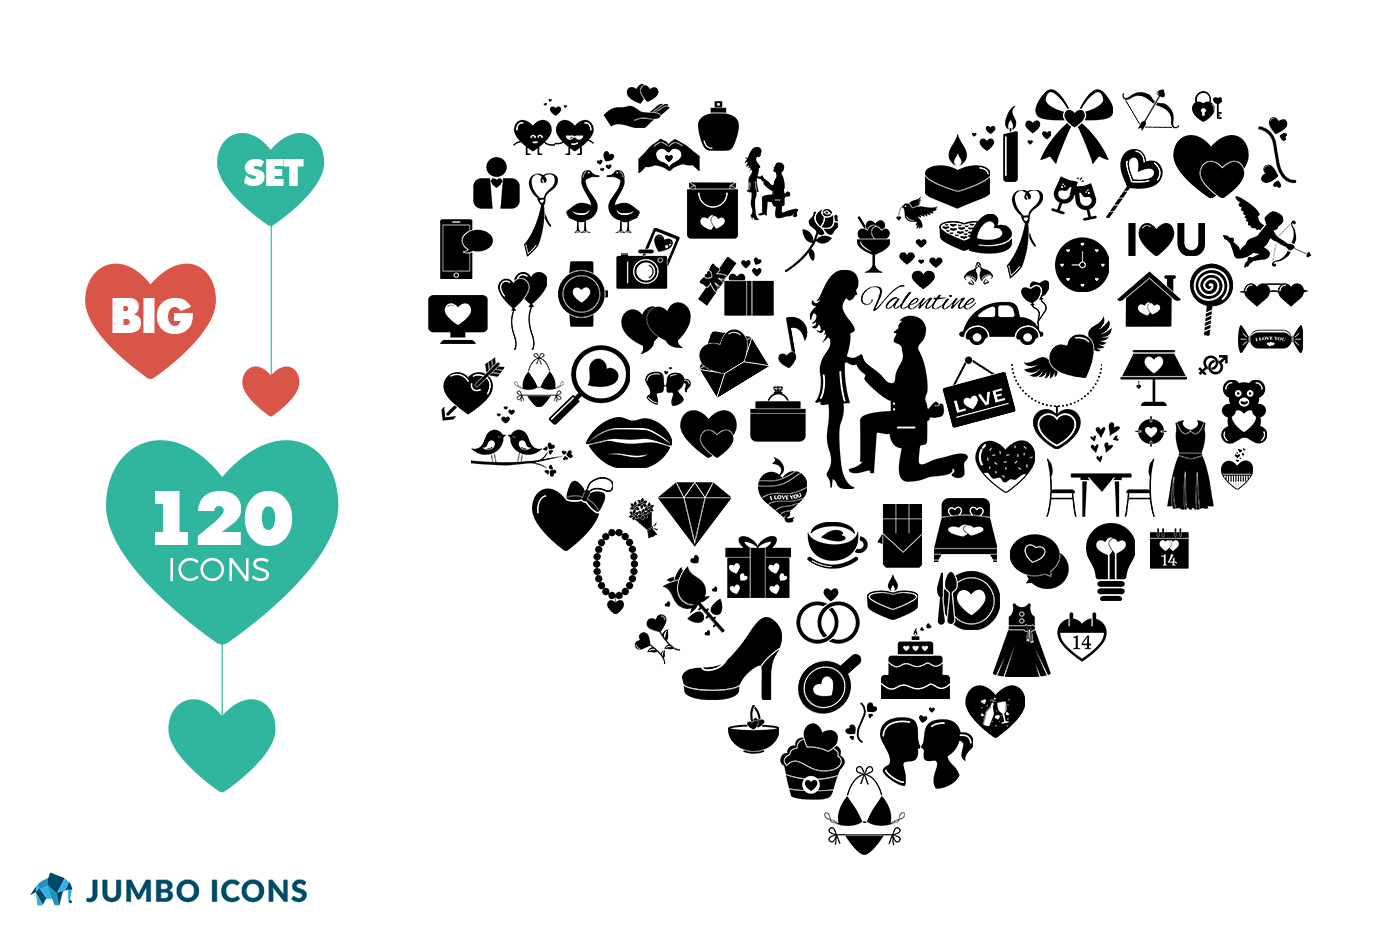 Valentine Icons set Heart Icons Set Love Icons Set Friendship Icons Set Wedding Icons Set vector social icons Big Icons Pack Best Love Illustrations Glyph Love Icons 14 february Icons